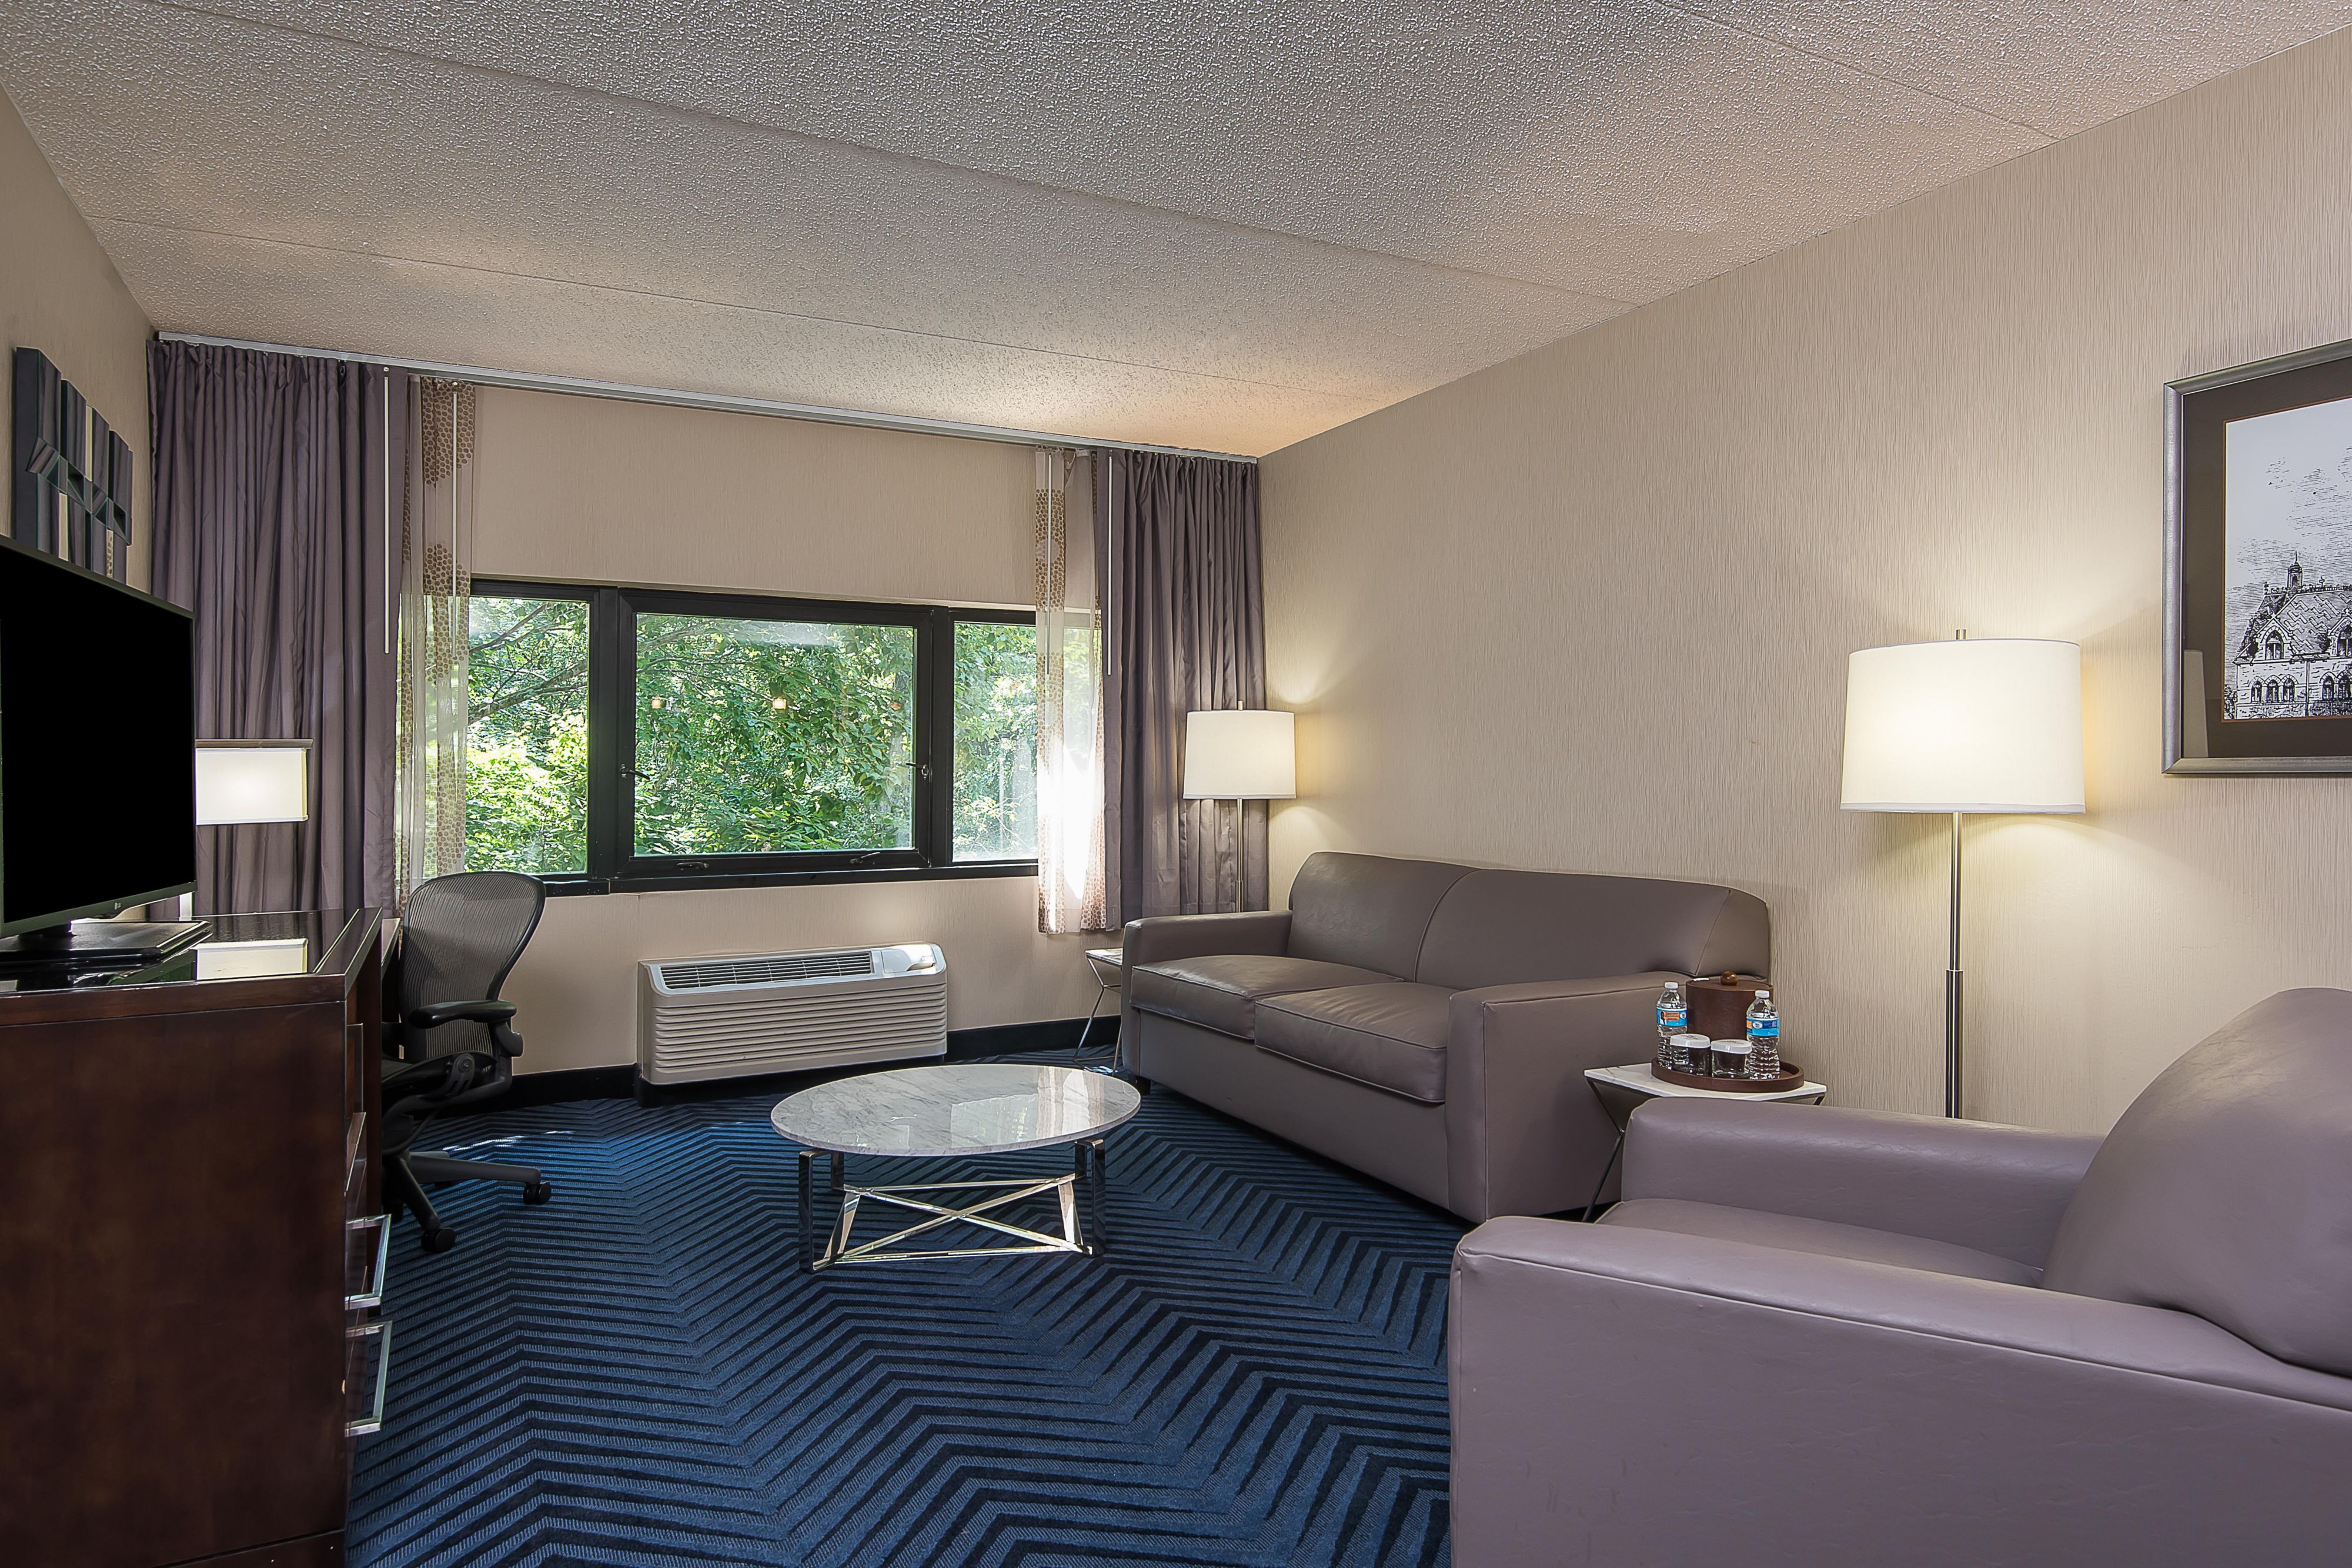 Executive Suite is available with adjoining King Bed or two Queens